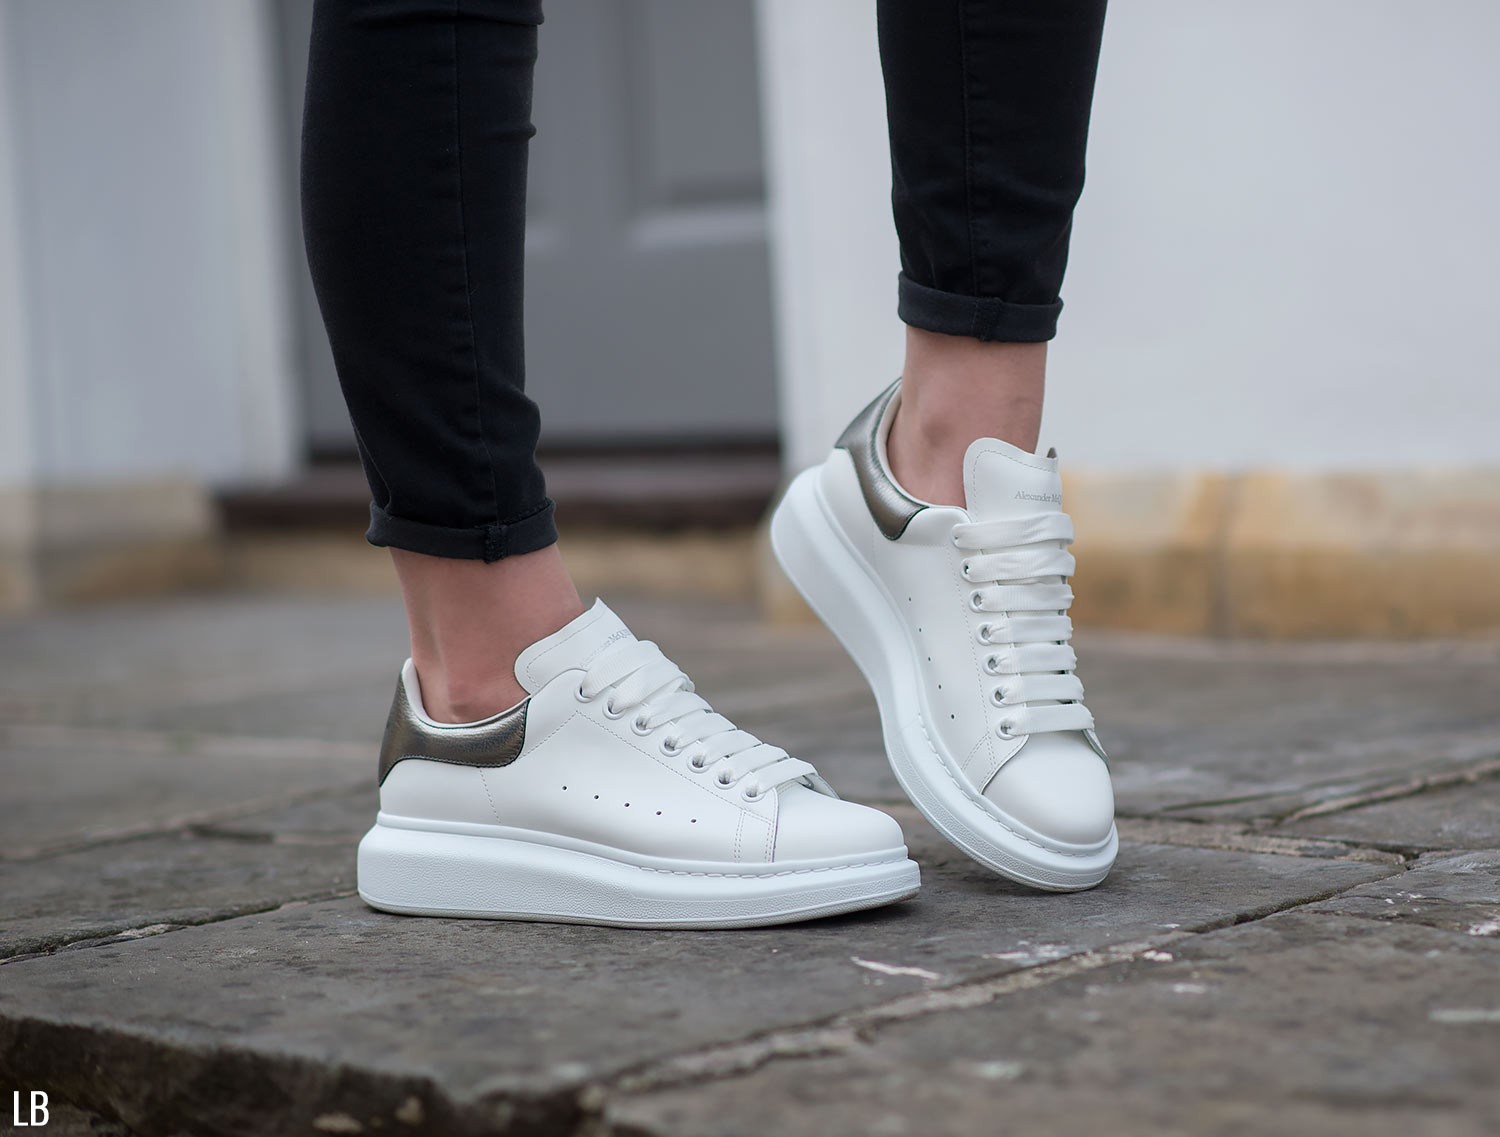 Whitney Normal Neglect Alexander McQueen Oversized Trainers Sneakers Review - Raindrops of Sapphire